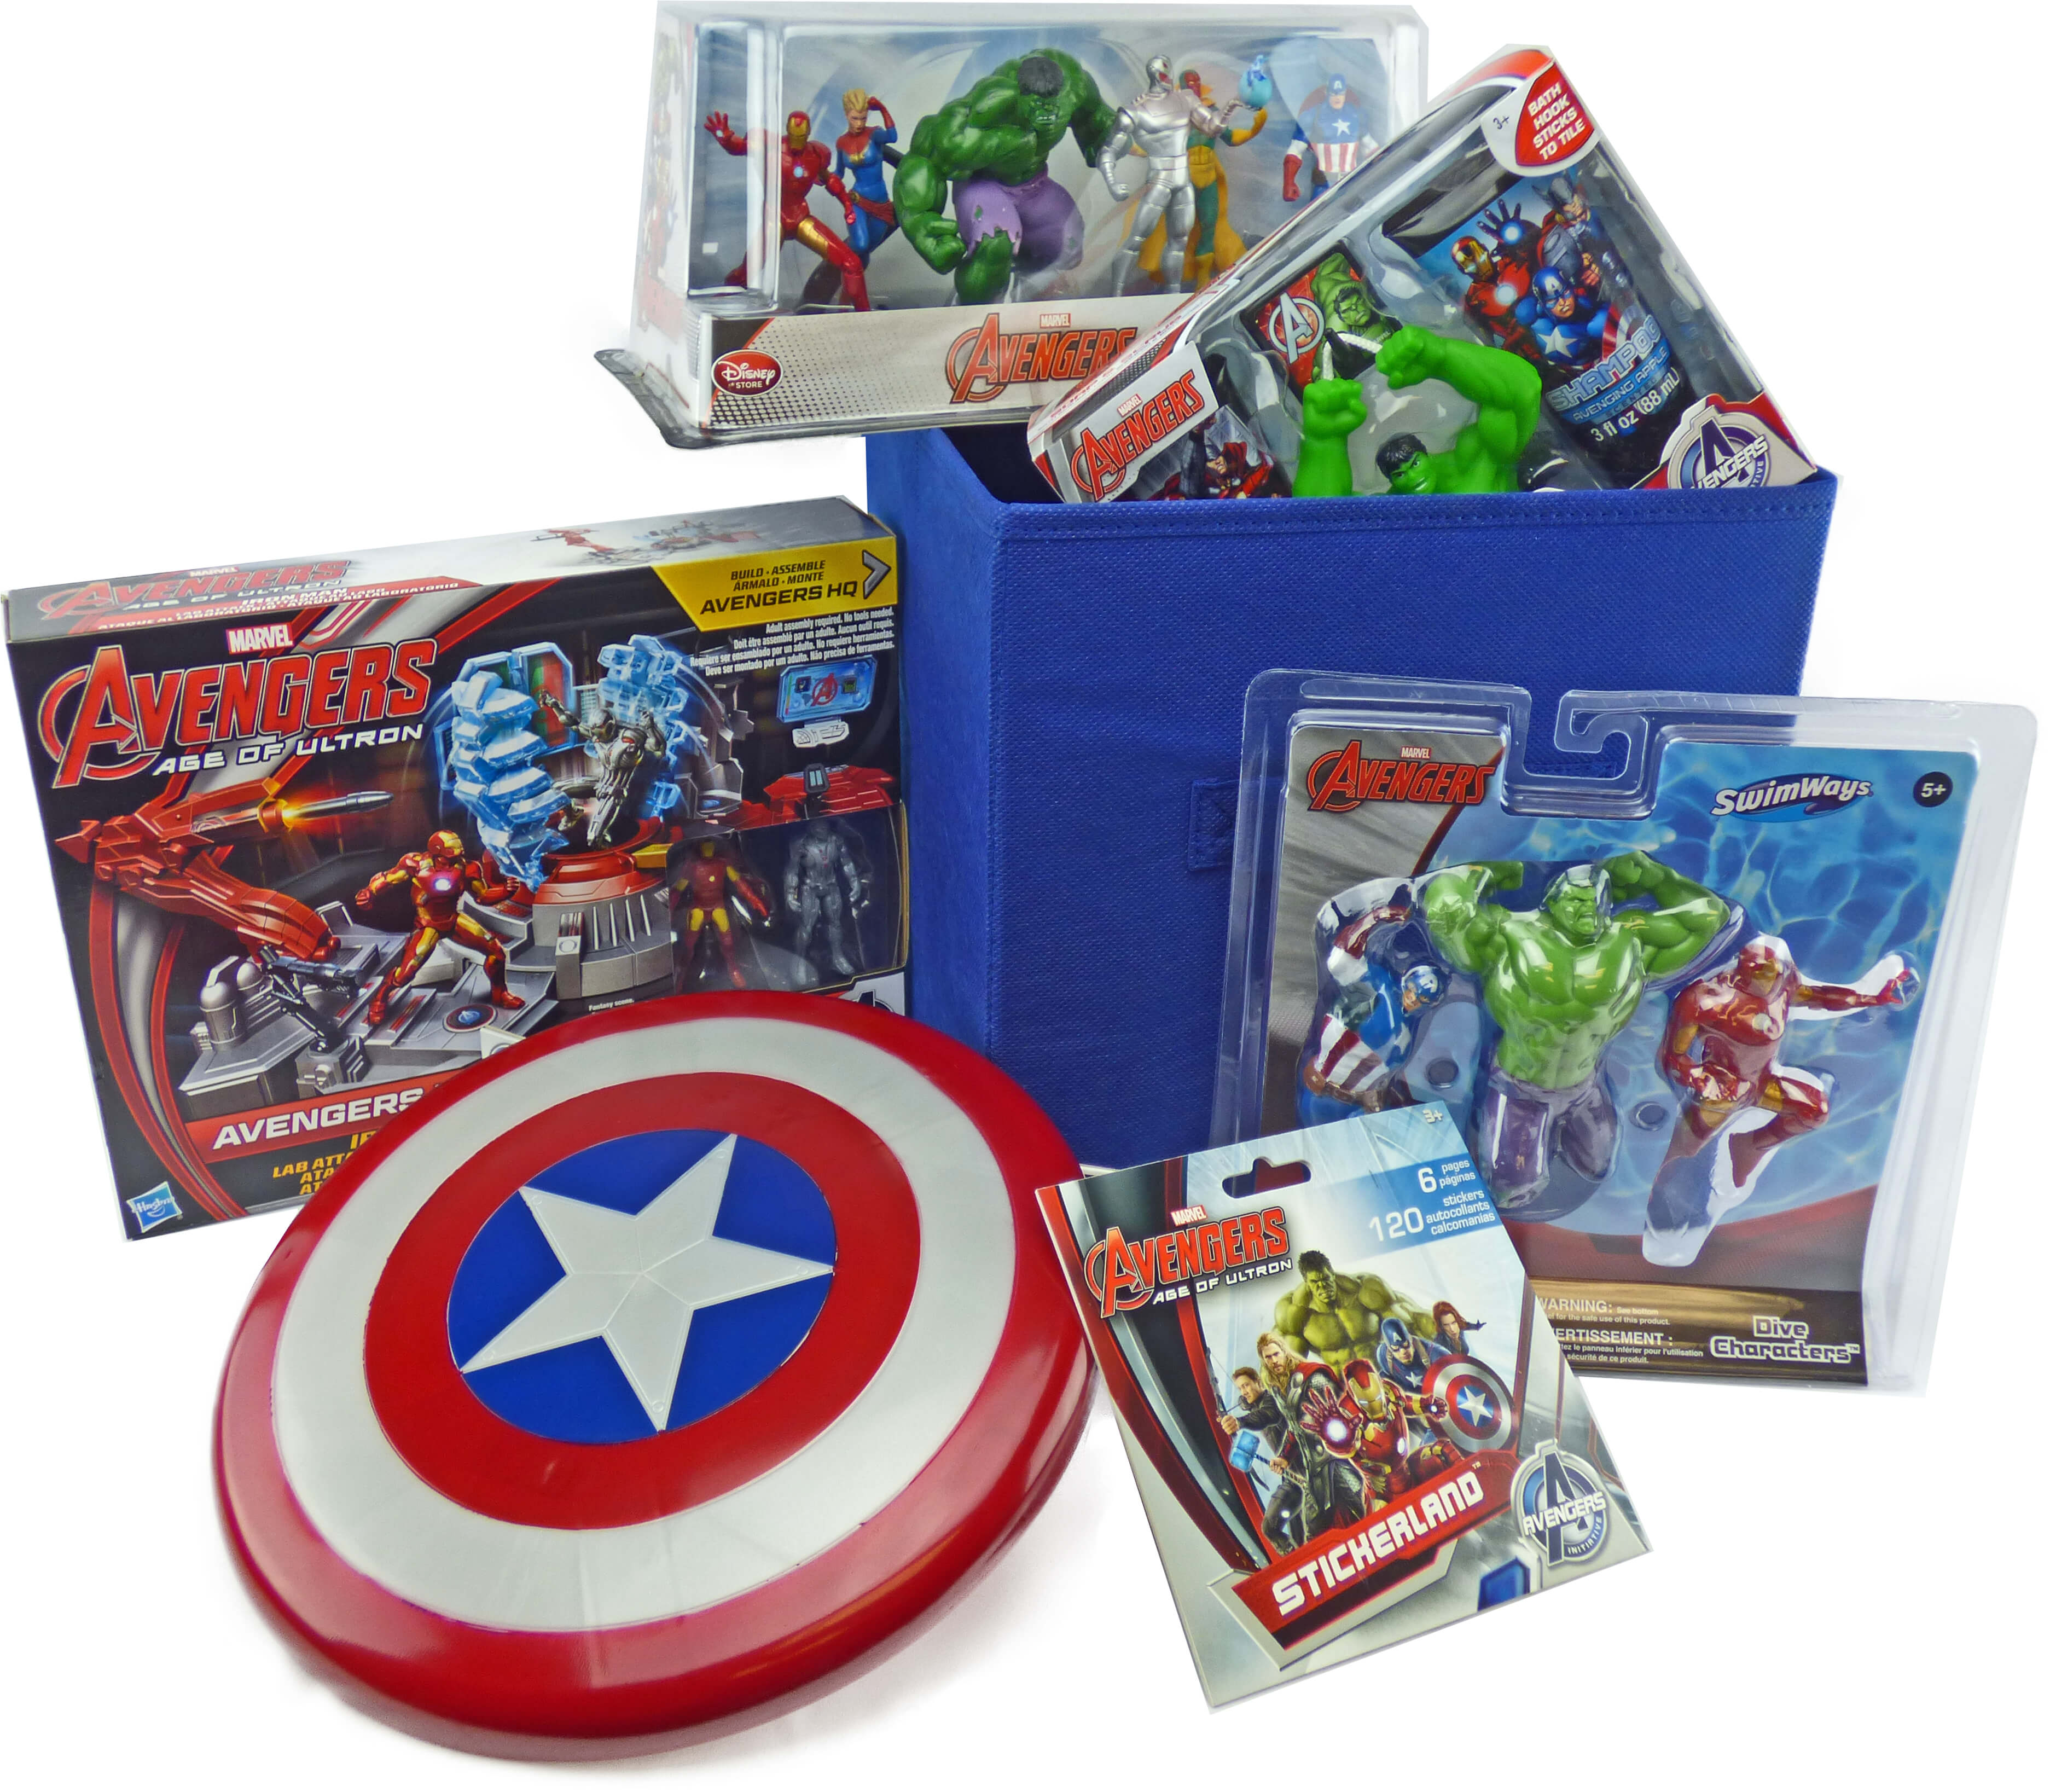 05 Avengers crate